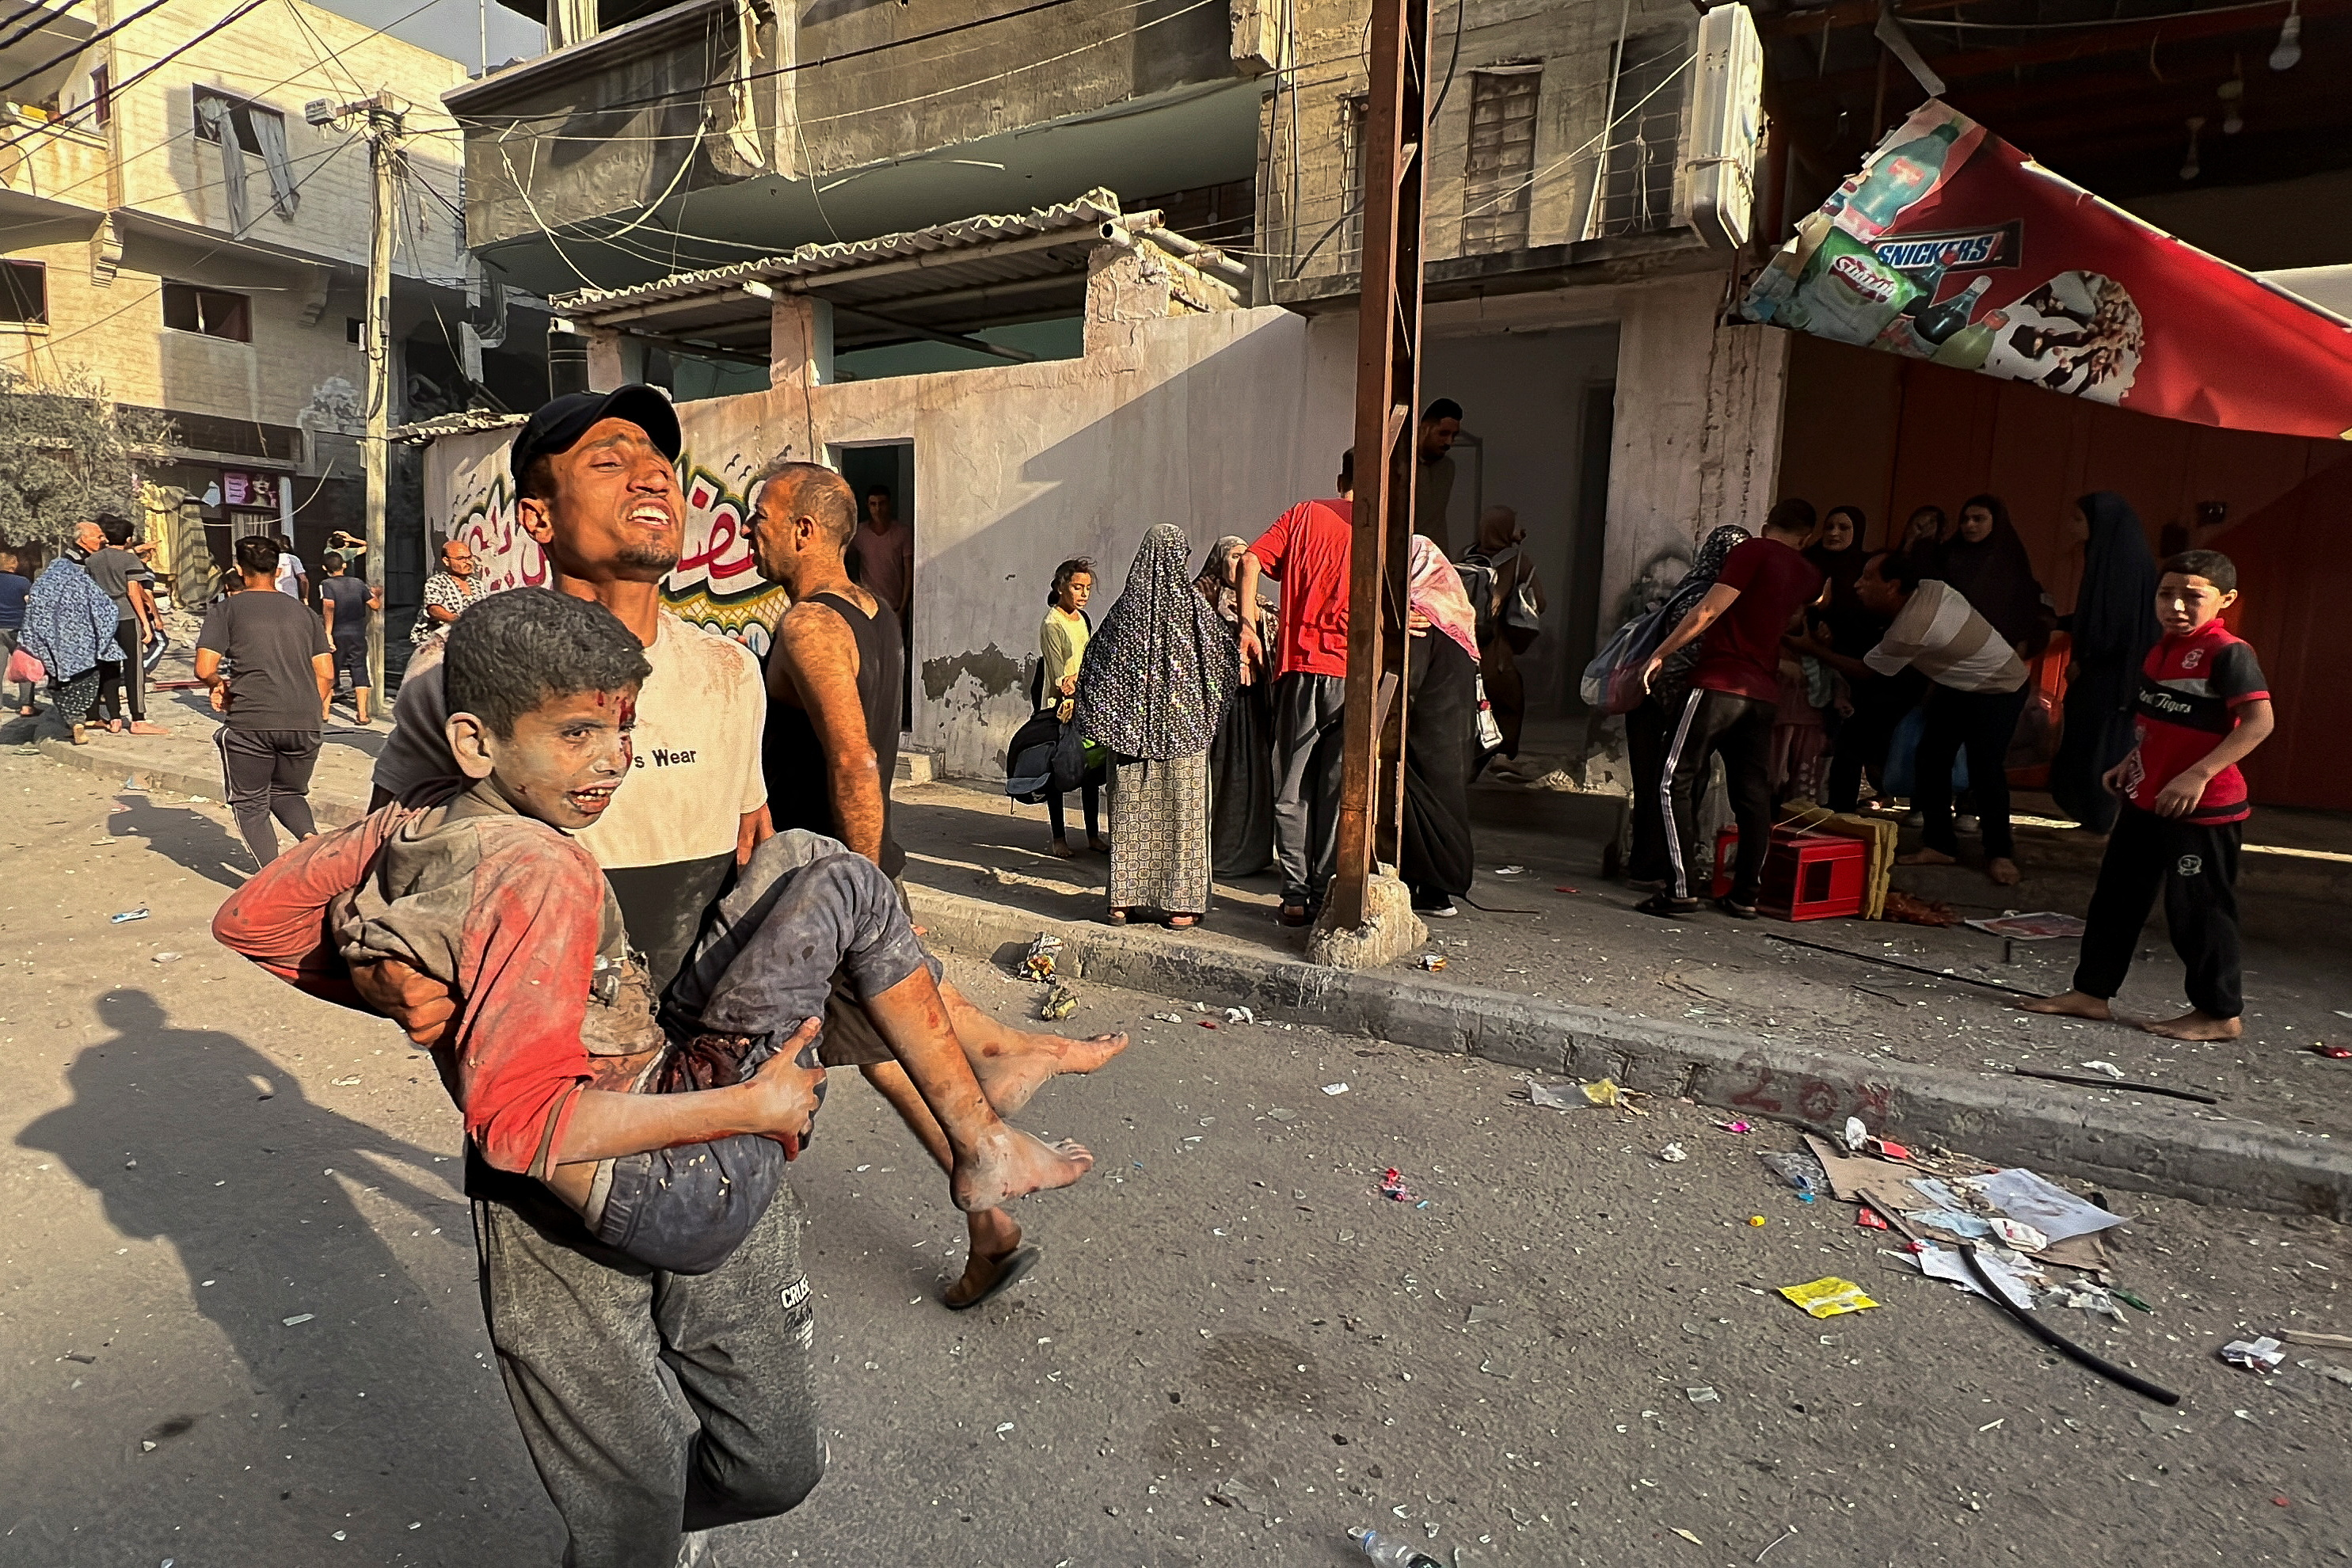 A Palestinian carries a child casualty at the site of Israeli strikes on houses, in Gaza City